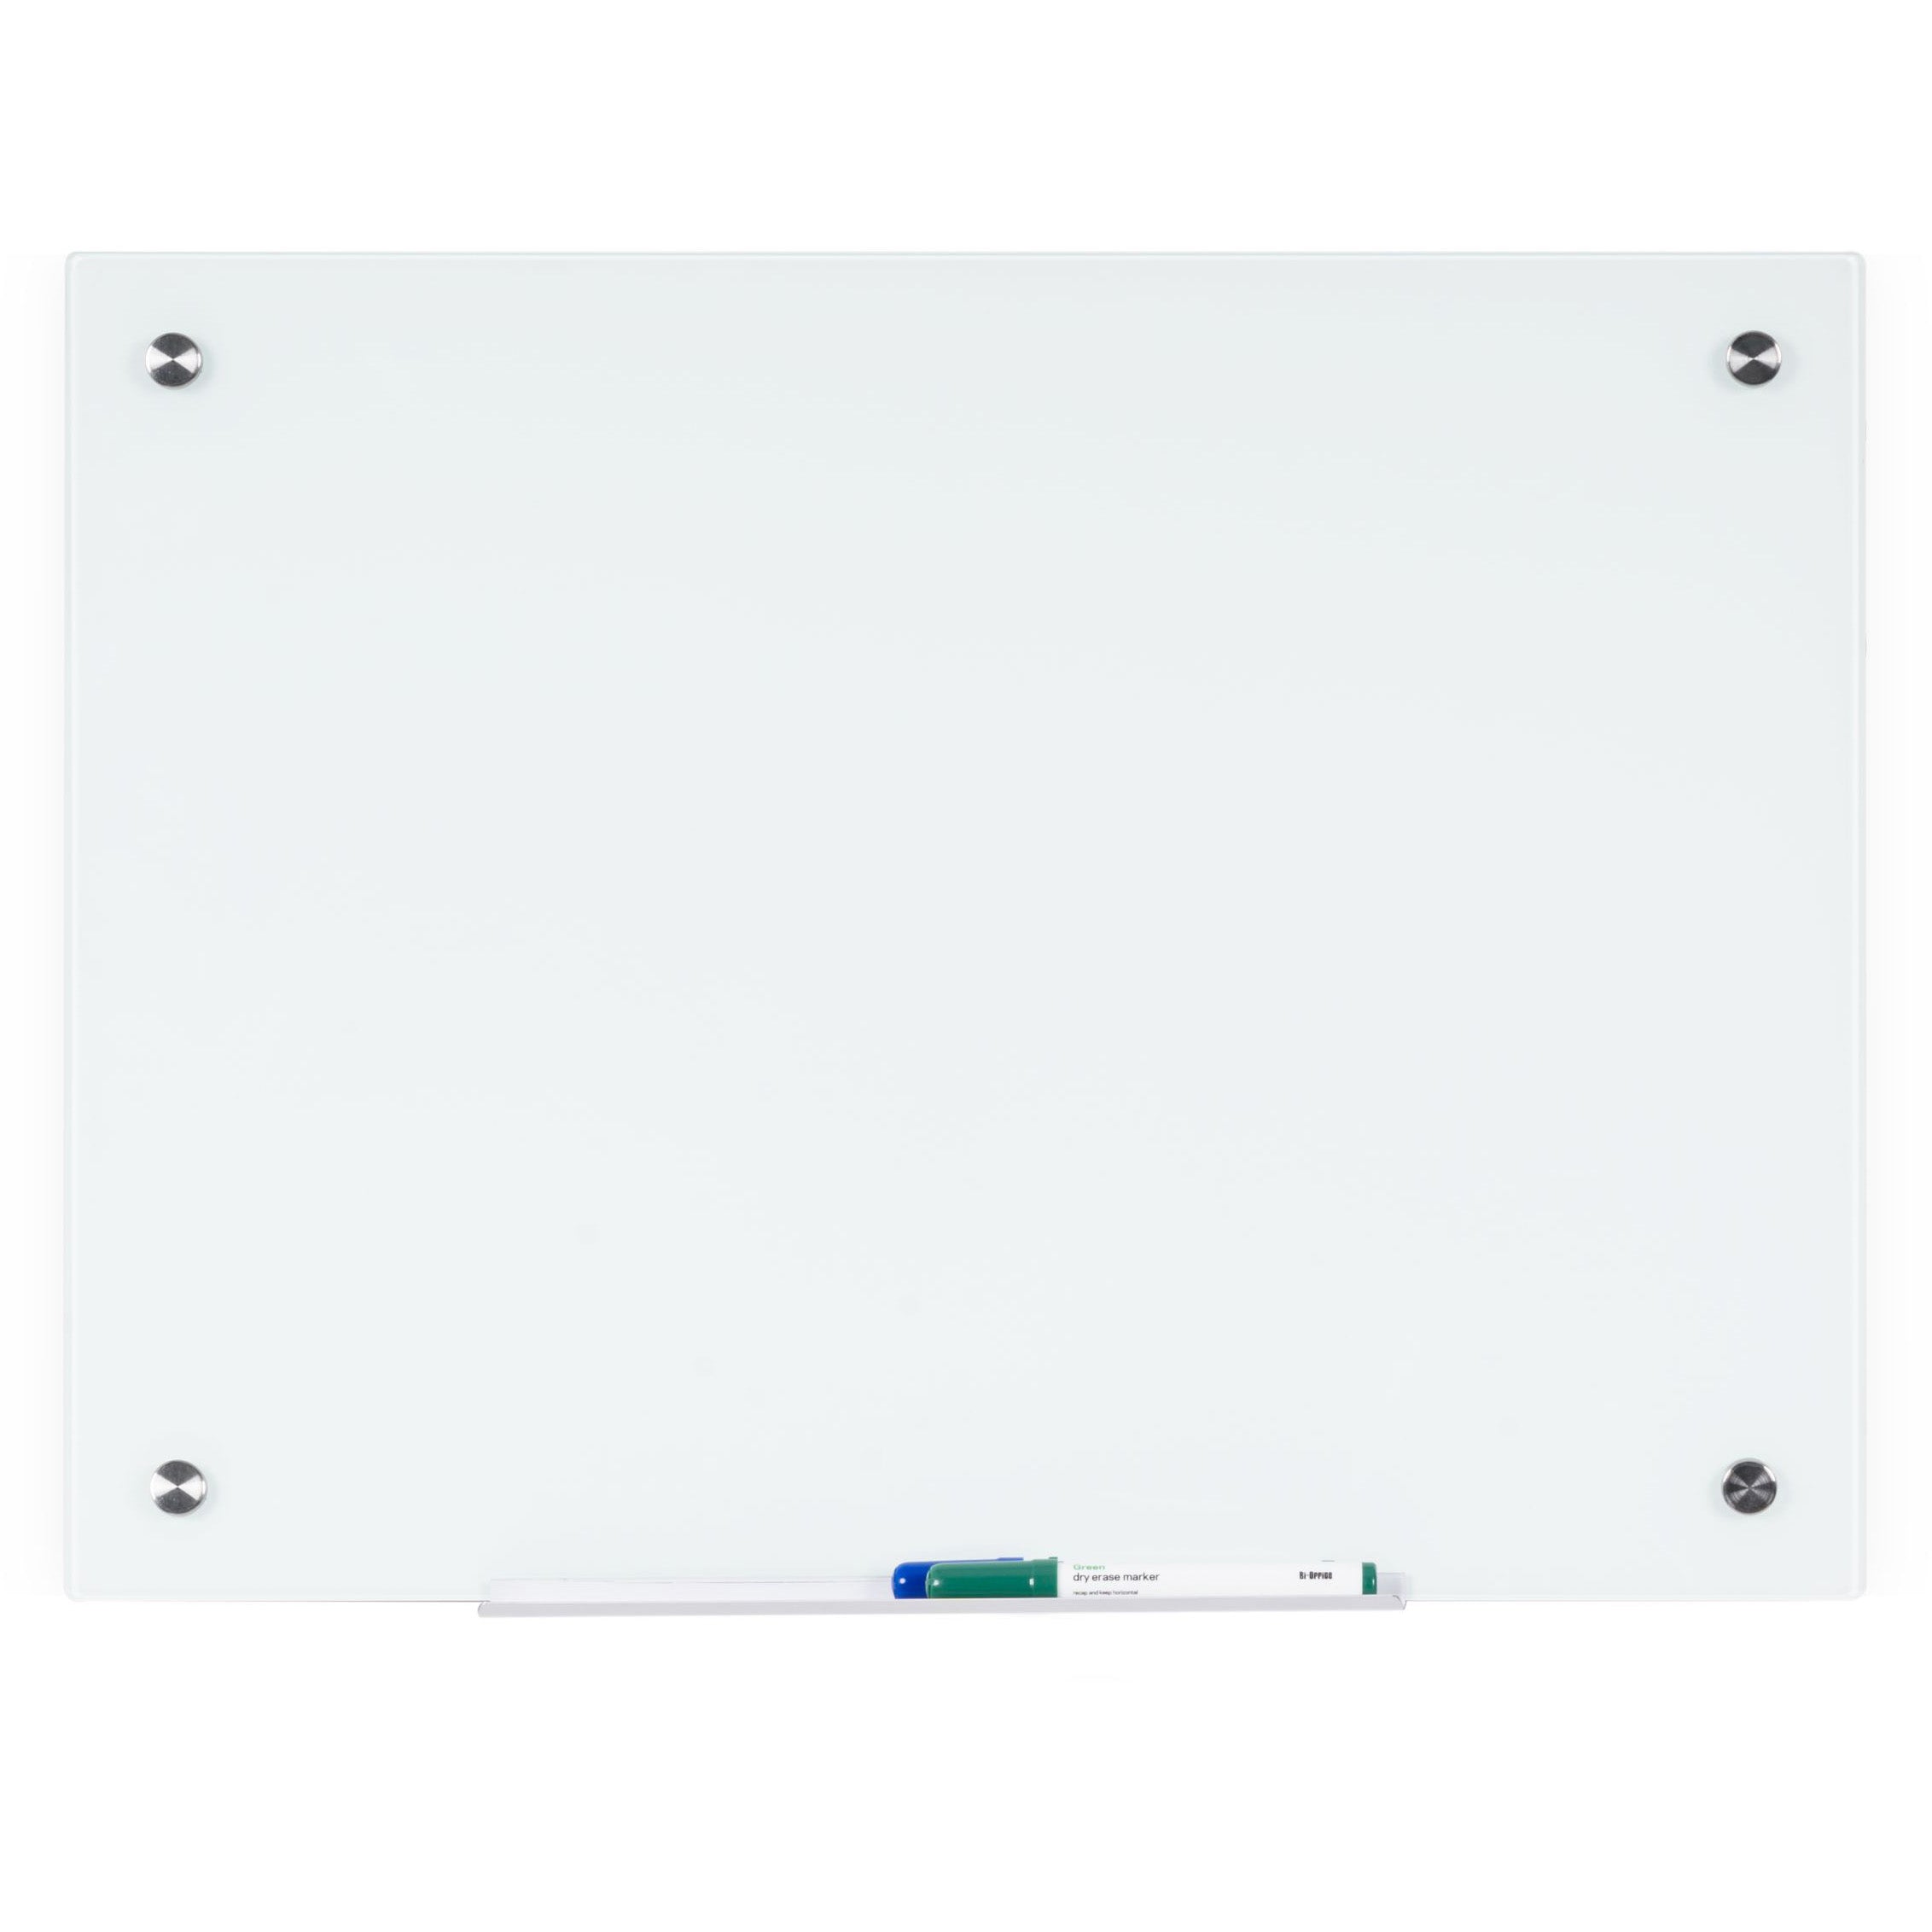 GL040107 River Magnetic Dry Erase Tempered Glass White Board, 18" x 24", Frameless Design, Wall Mount Kit Included by MasterVision